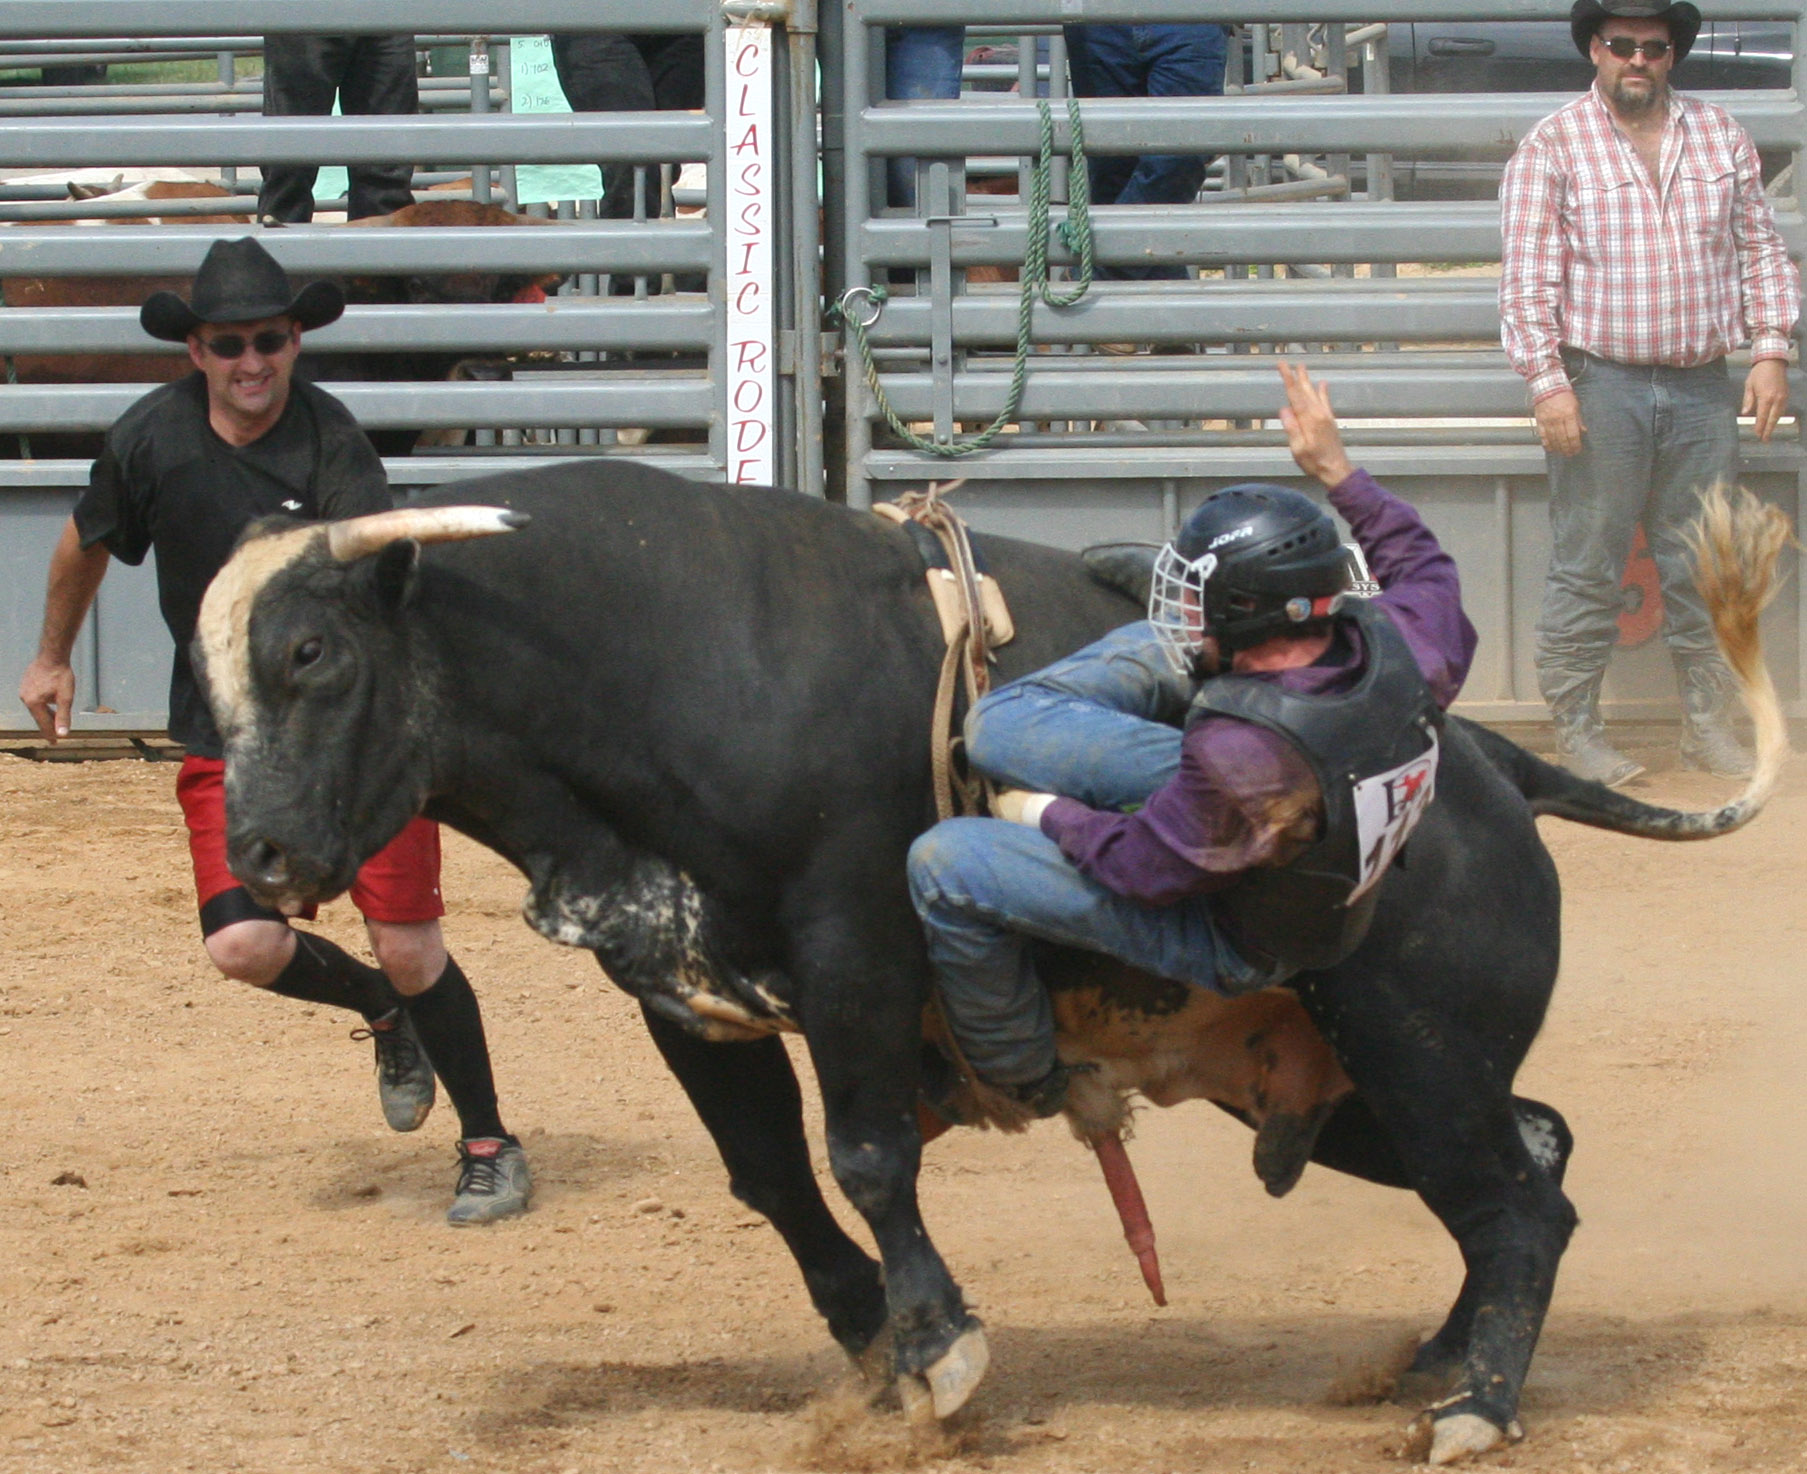 a person riding a bull in a dirt area